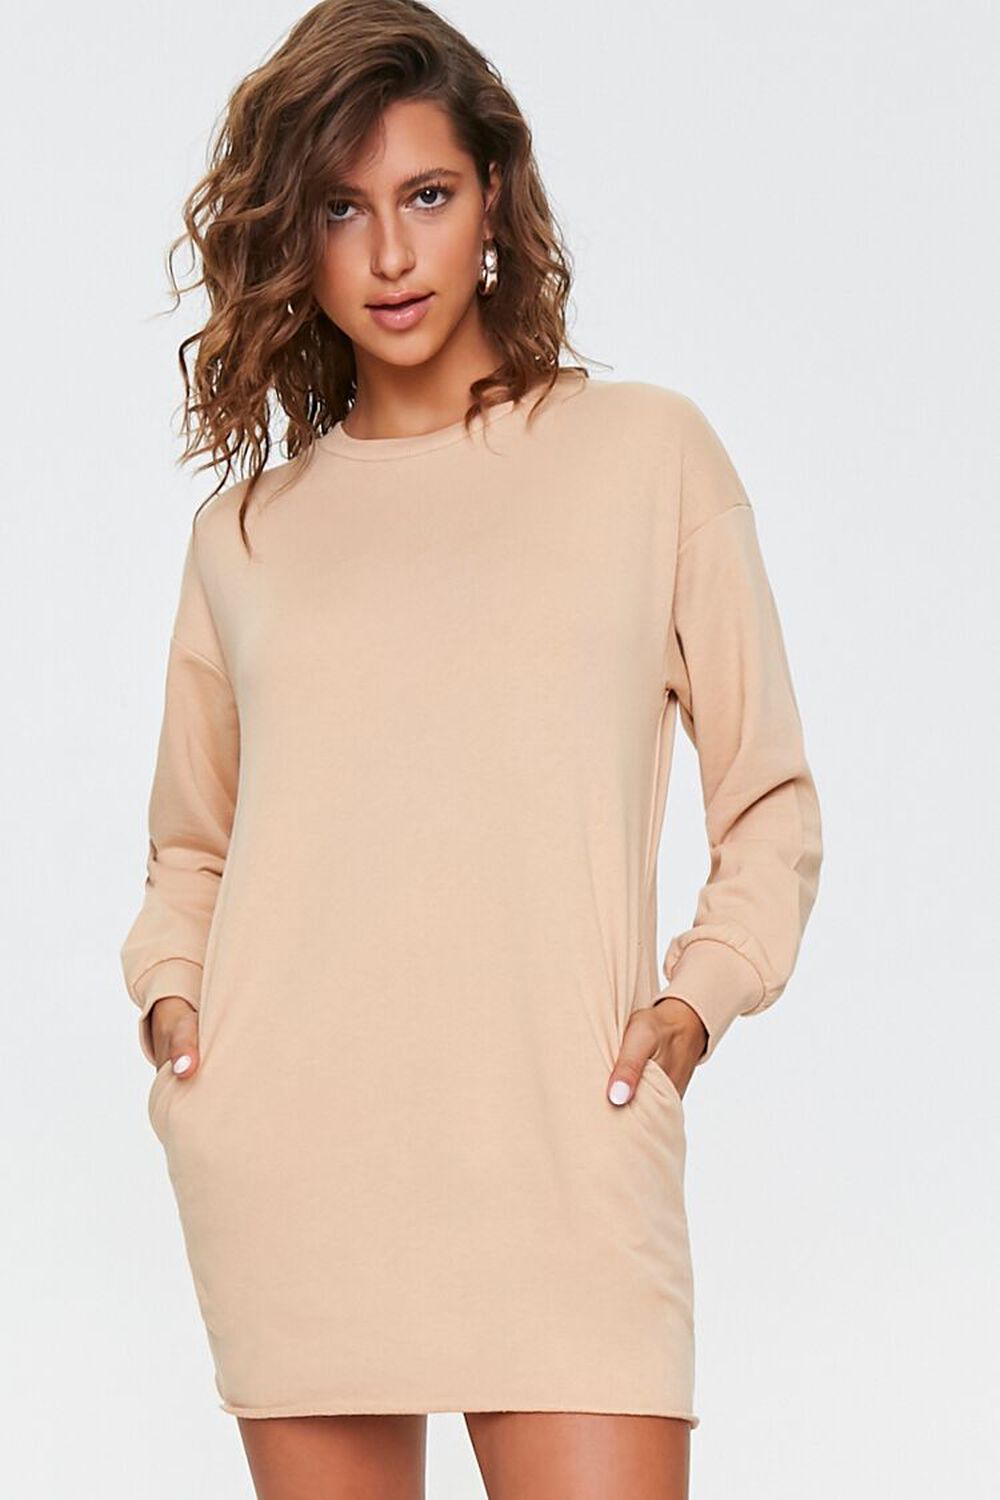 TAUPE French Terry Sweatshirt Dress, image 1